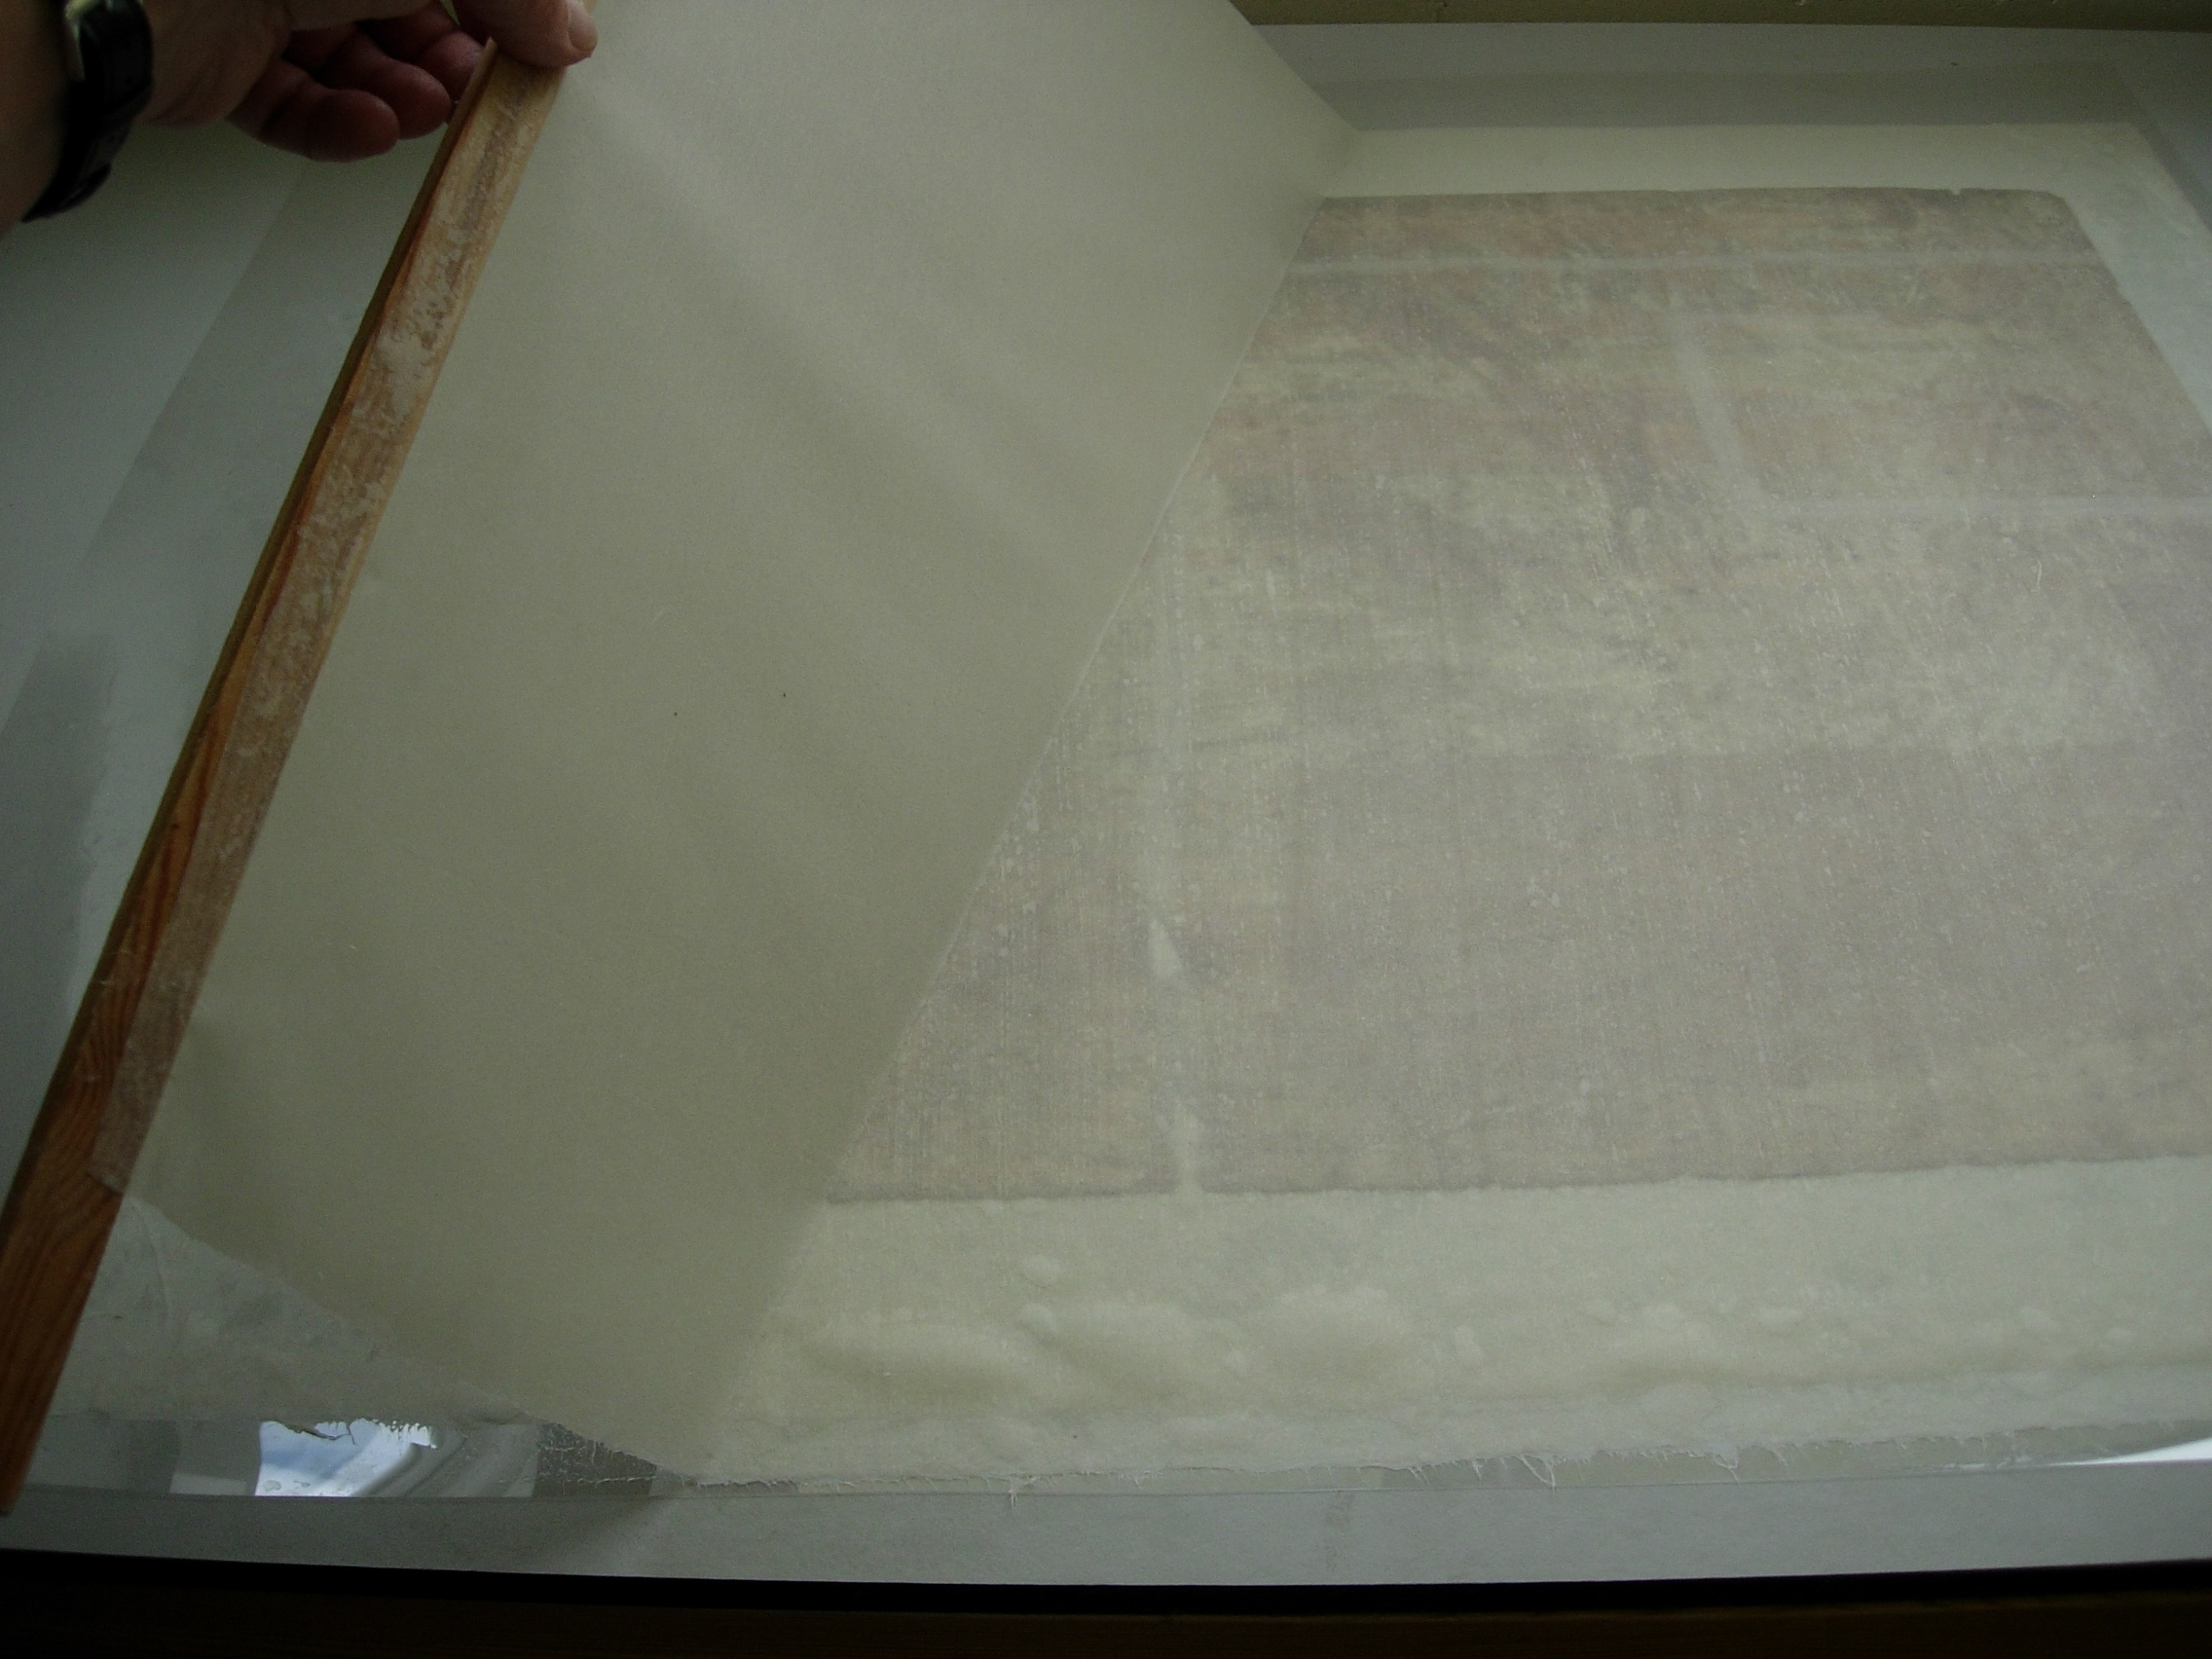 Blackpool poster, during conservation, applying lining of Japanese paper